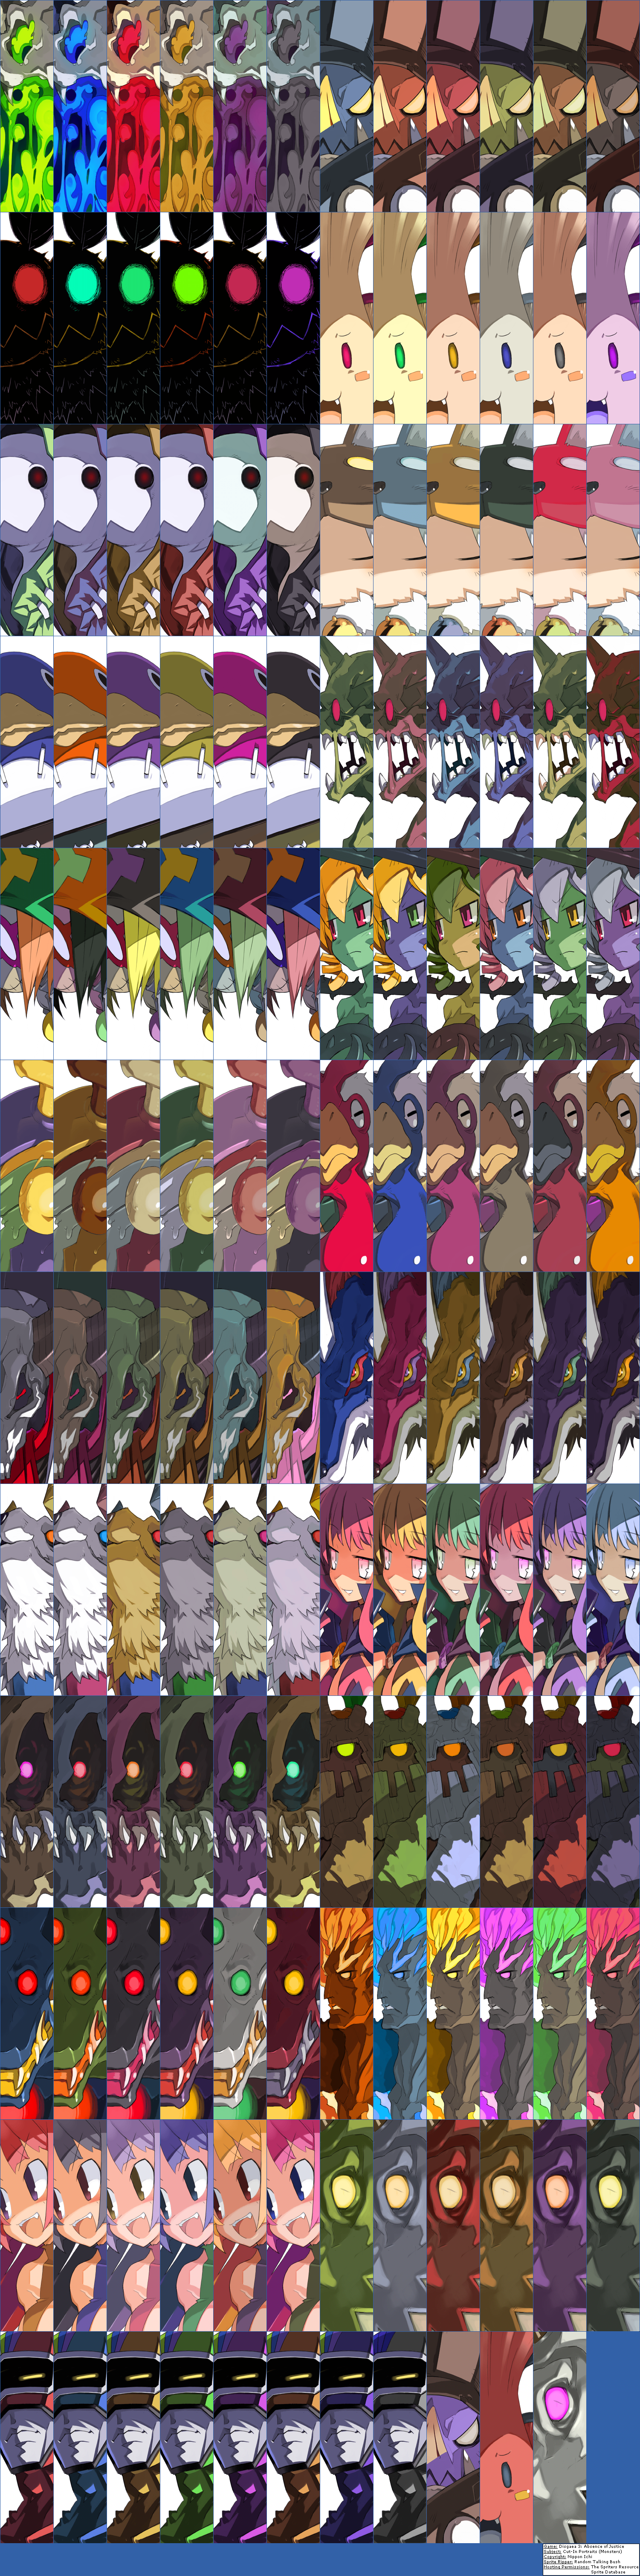 Disgaea 3: Absence of Justice - Cut-In Portraits (Monsters)